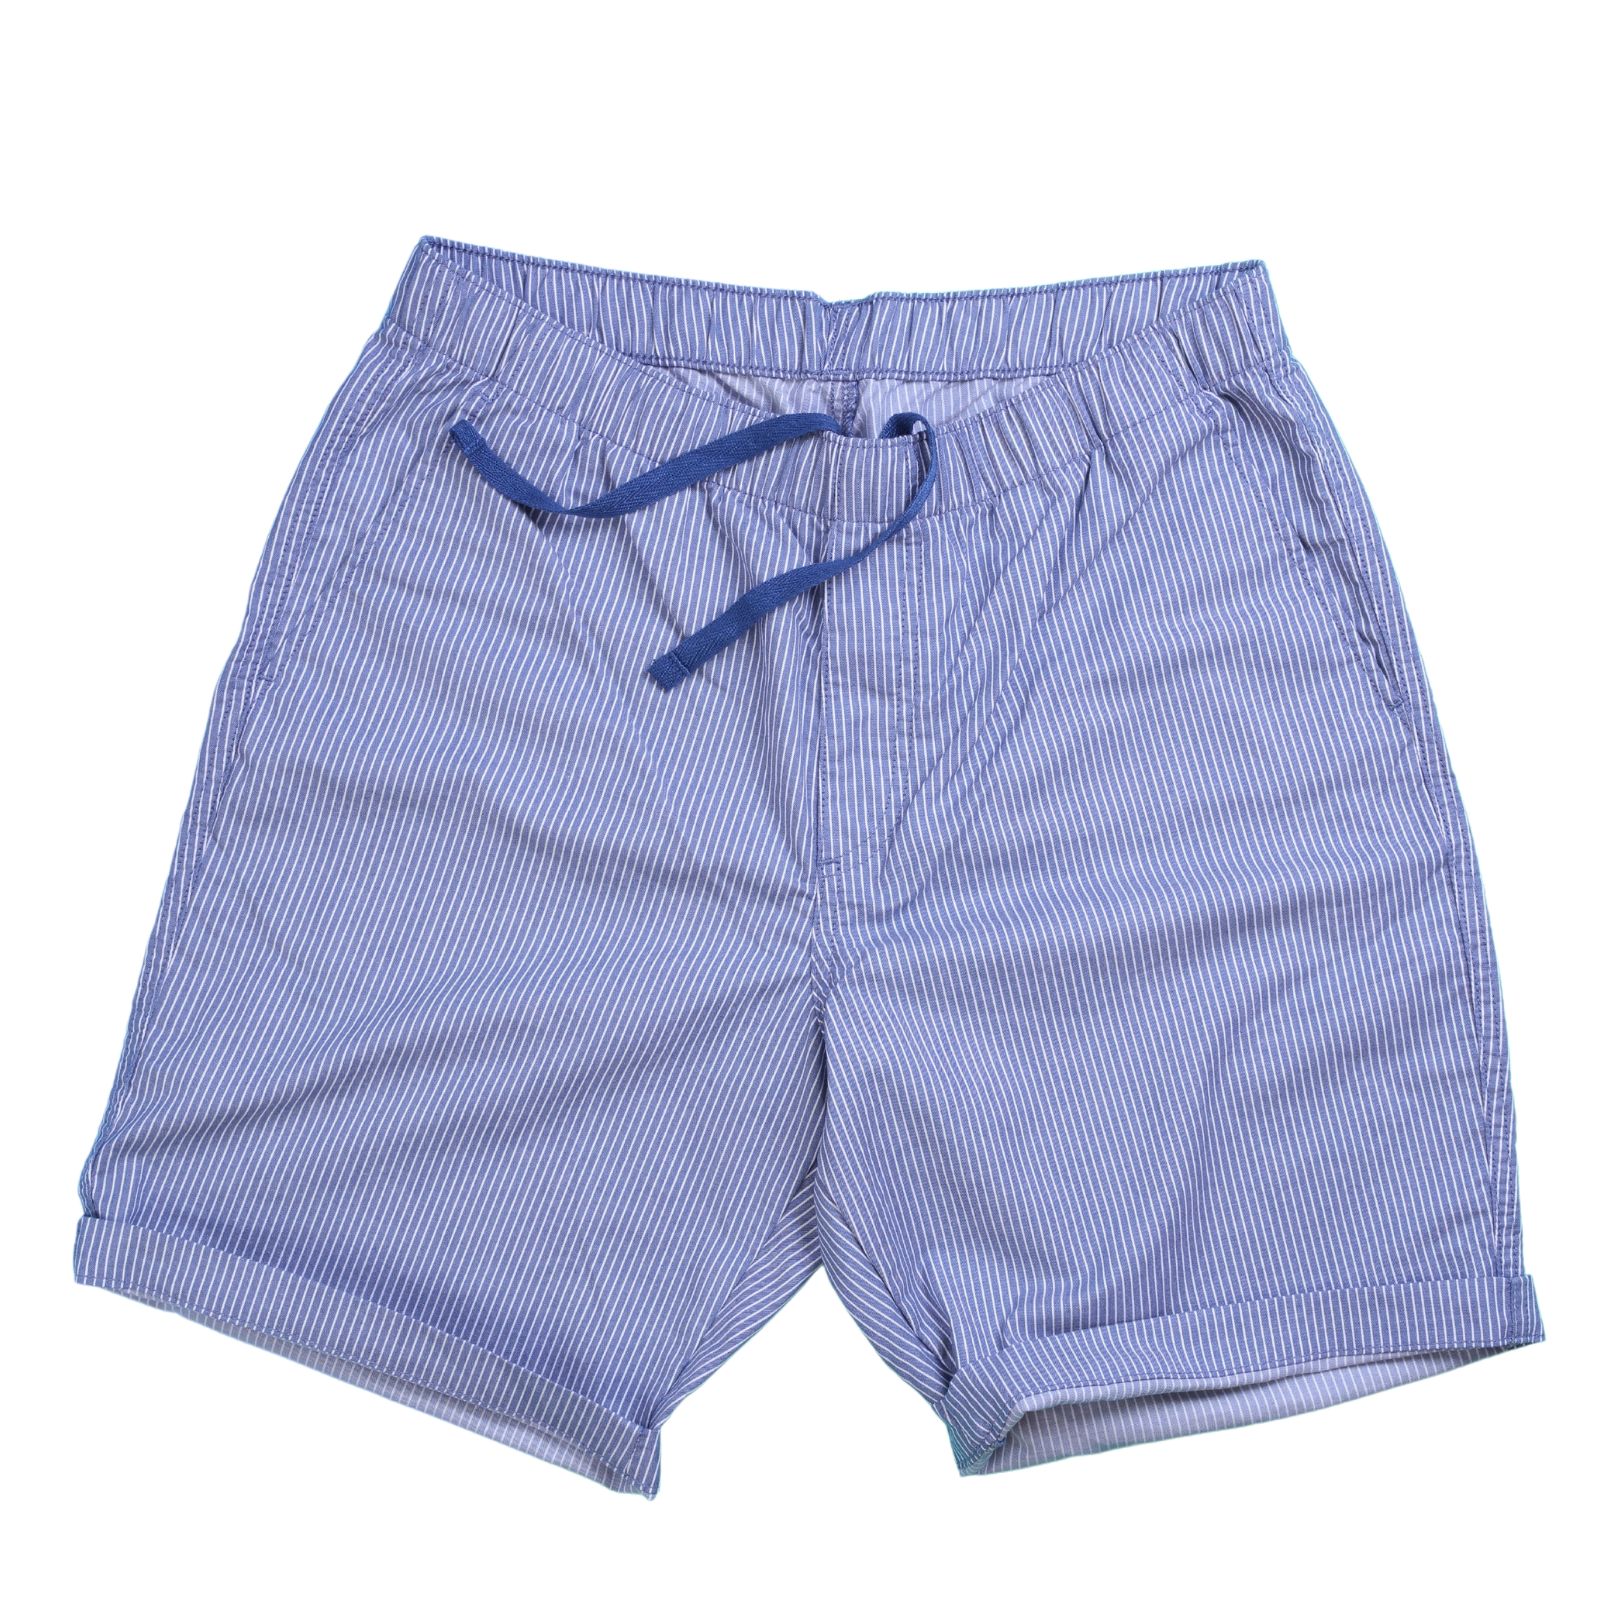 Premium Quality Cotton Short Manufactured By The Leading Custom Shorts Manufacturer In Pakistan, X Athletic Wear.